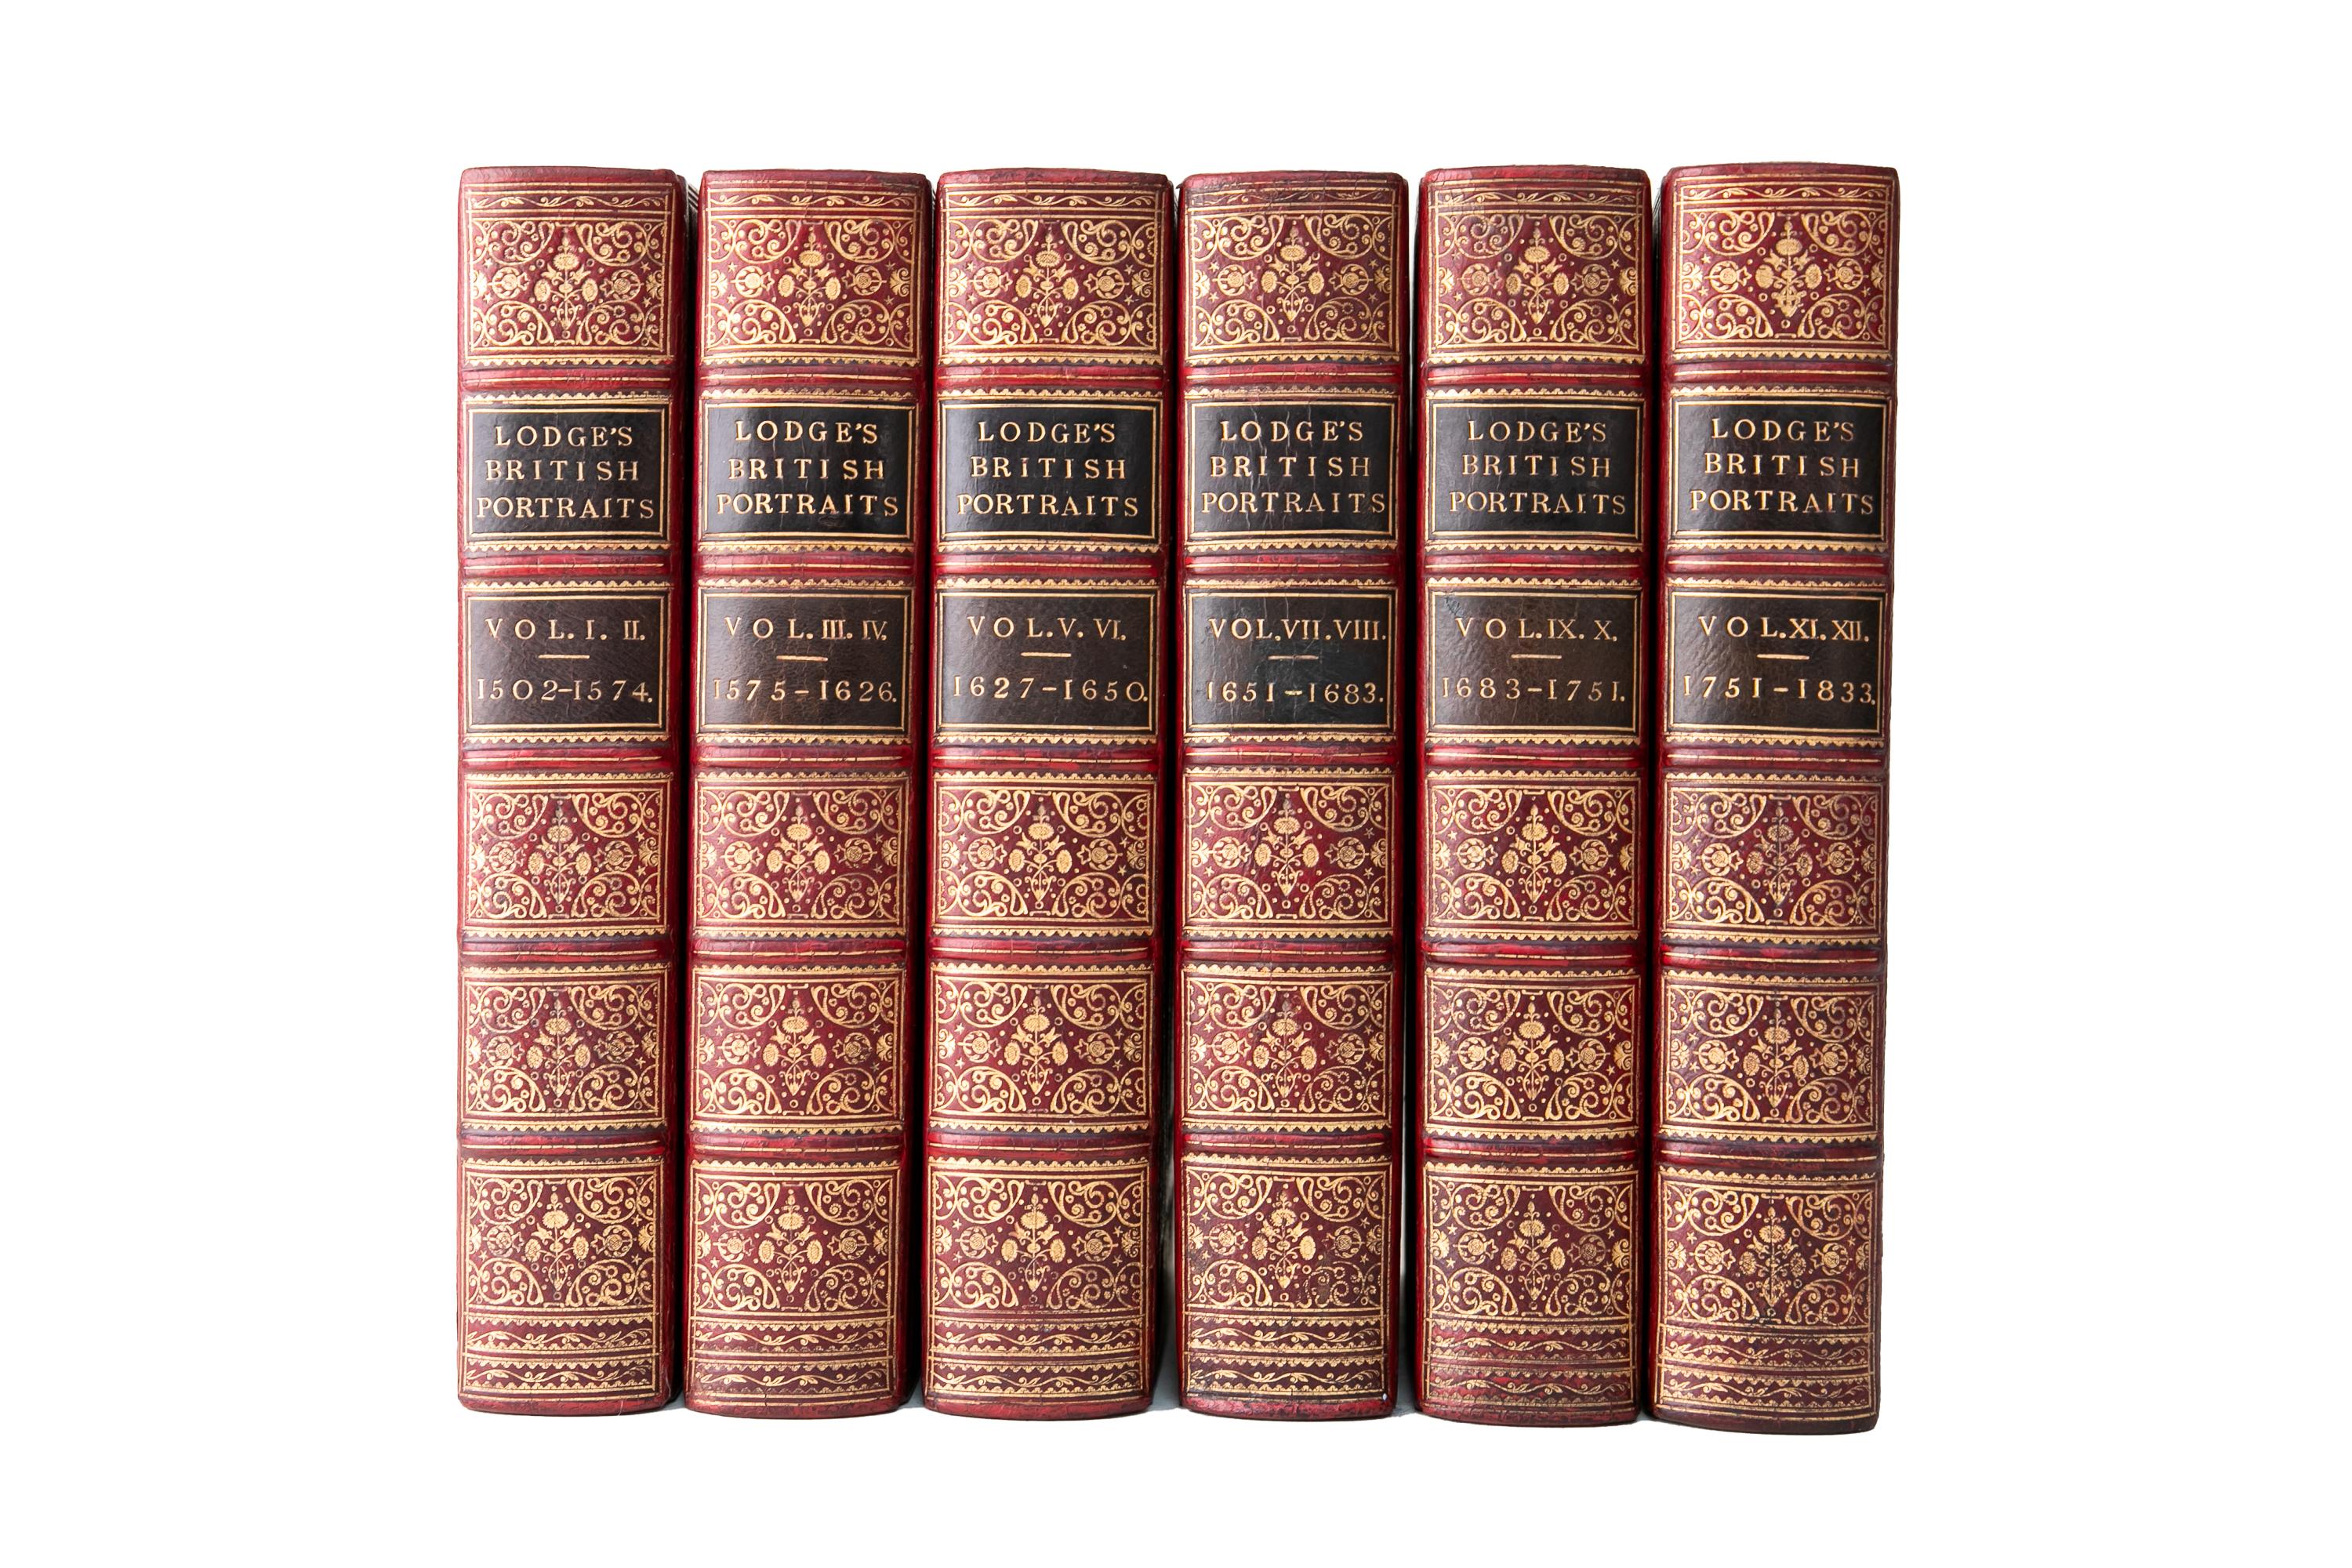 6 Volumes. Edmund Lodge, Portraits of Illustrious Personages of Great Britain. For Sale